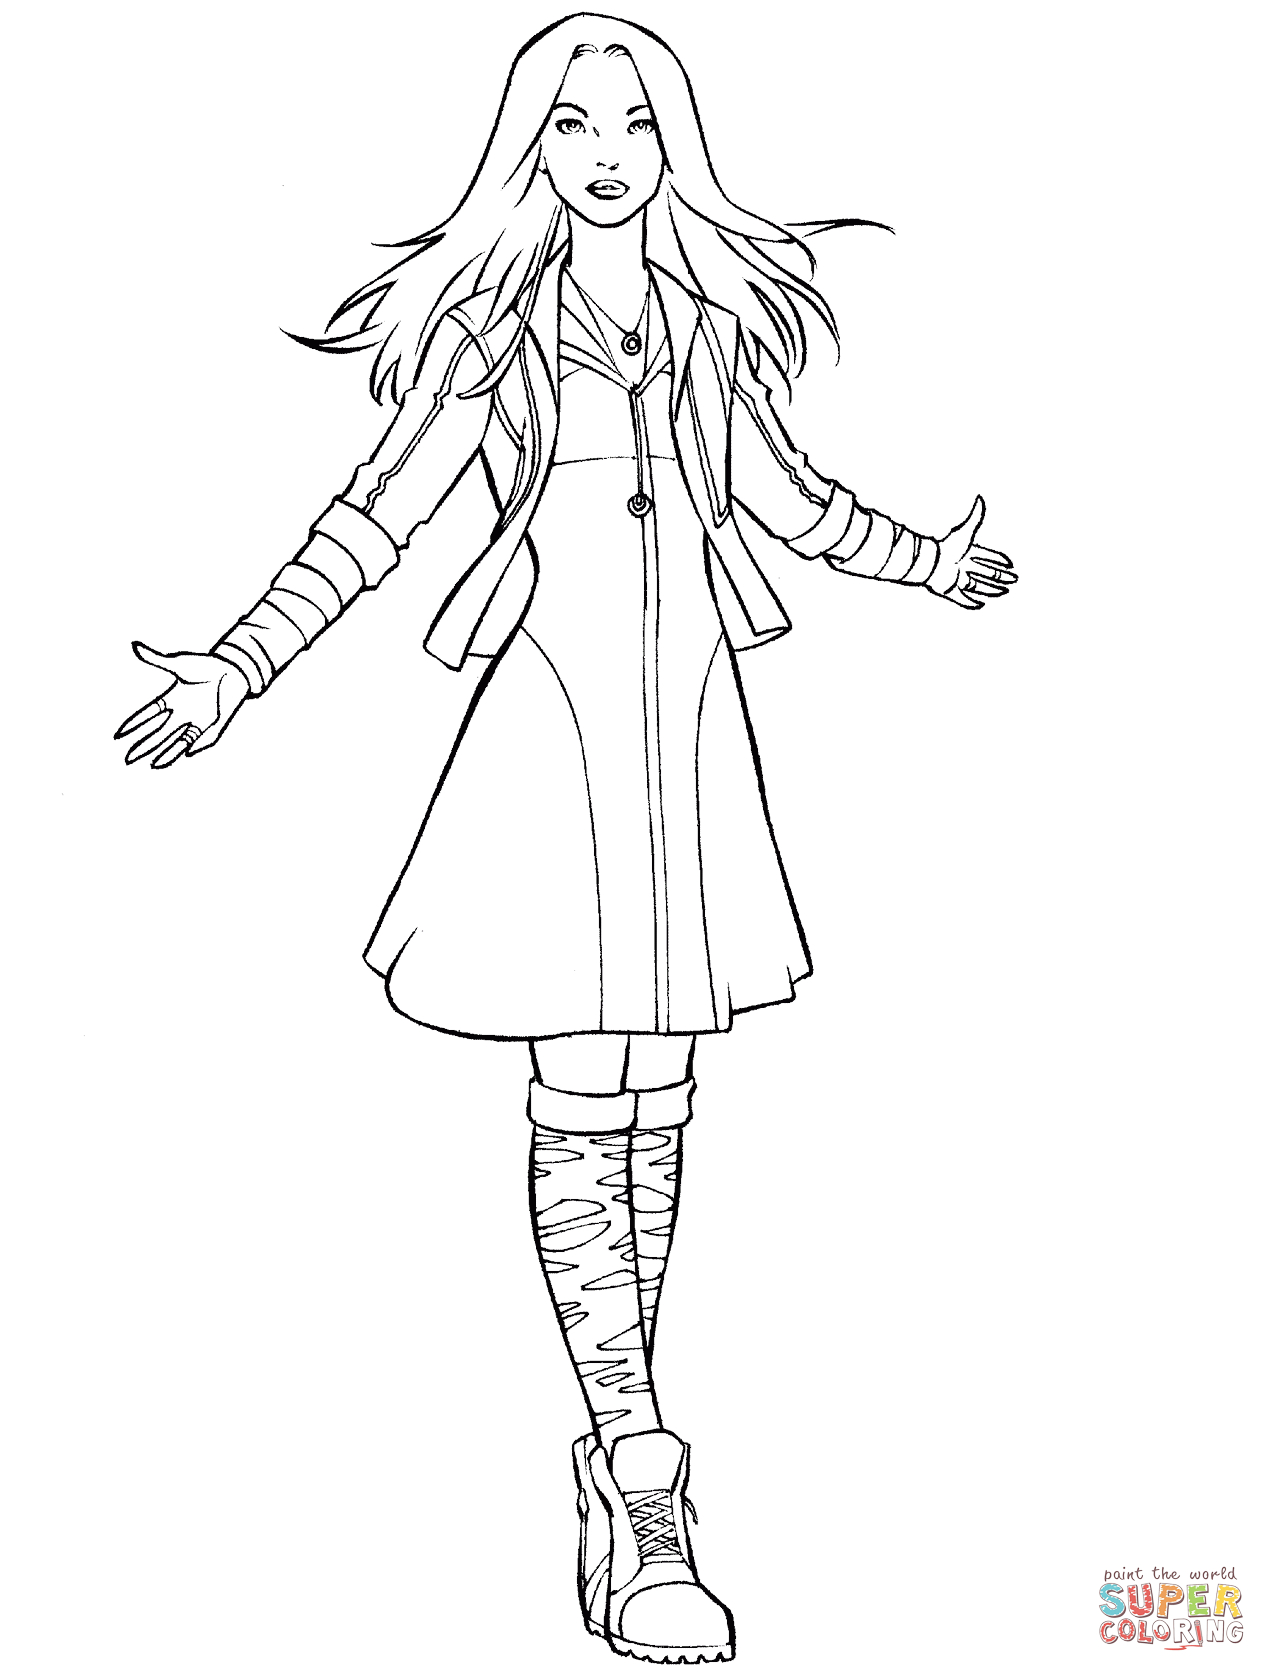 Avengers Scarlet Witch Coloring Page | Free Printable Coloring Pages - Free Printable Pictures Of Witches